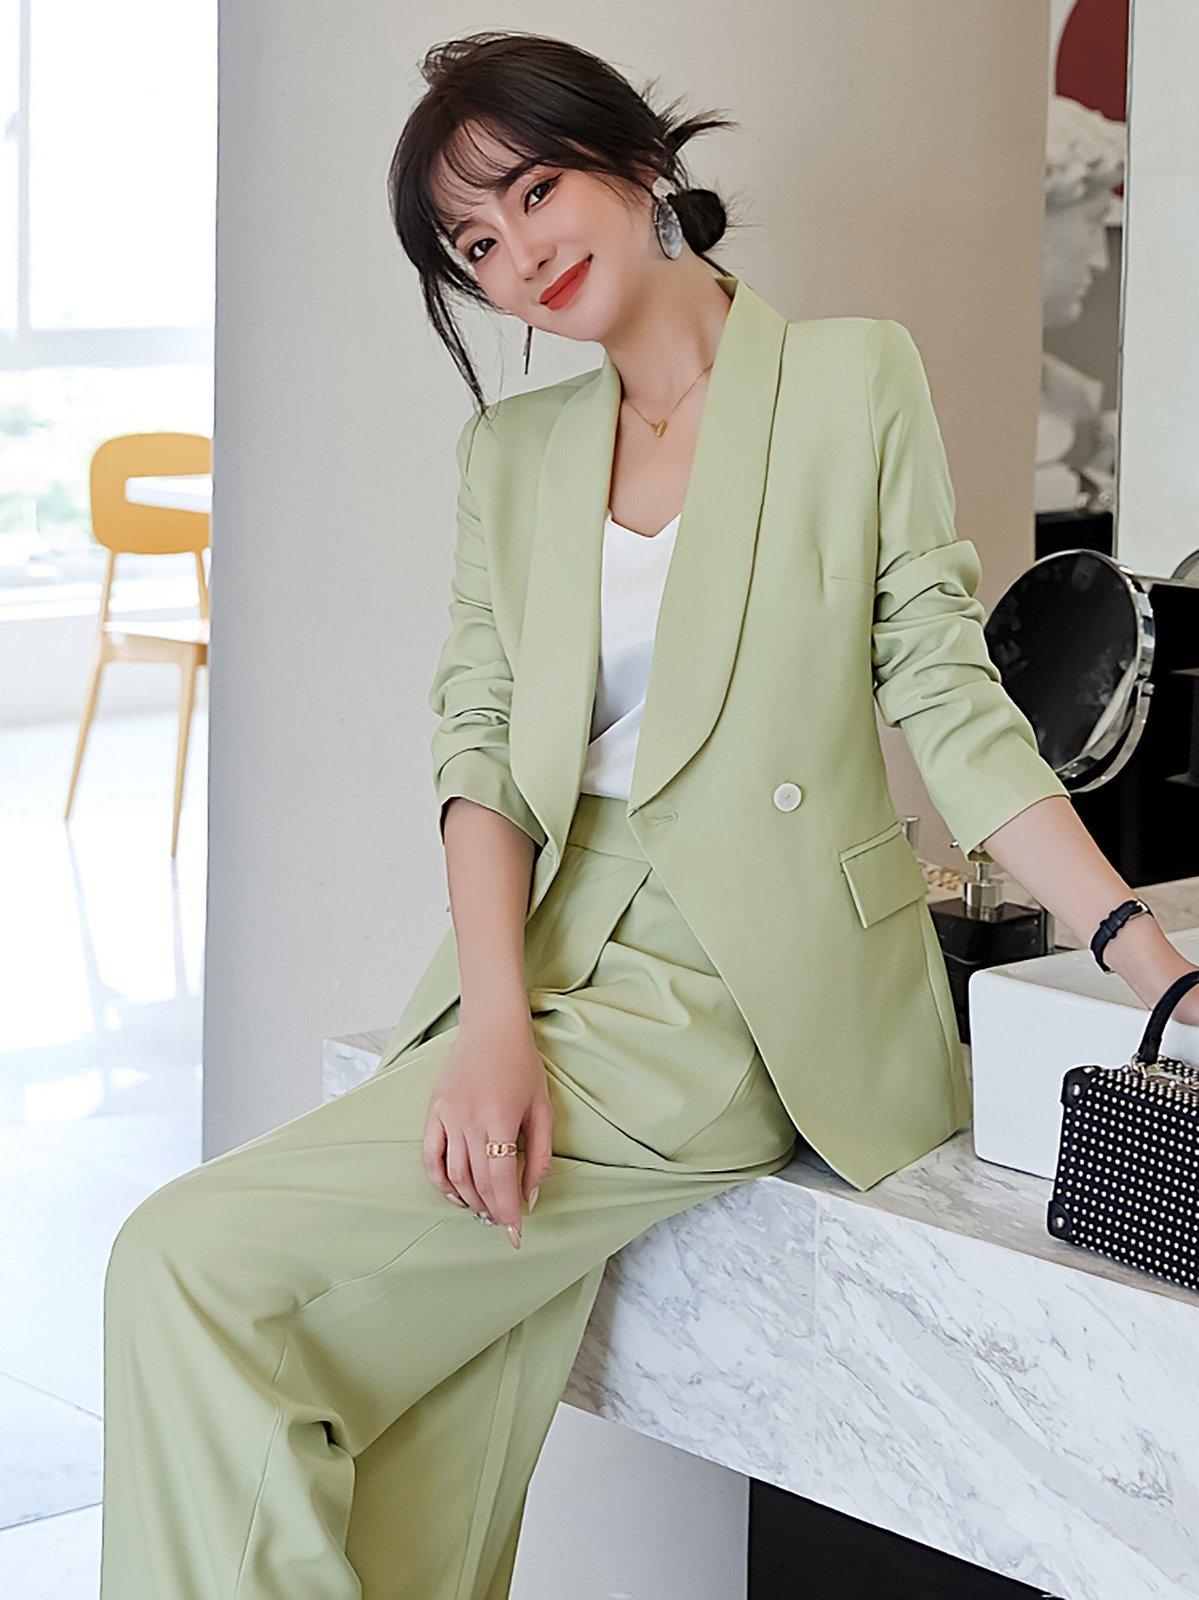 Sexy Double Breasted White Blazer Suit For Women Perfect For Formal  Occasions, Proms, Weddings, And Office Wear Ladies Summer Jackets And Pants  Included From Foreverbridal, $82.86 | DHgate.Com